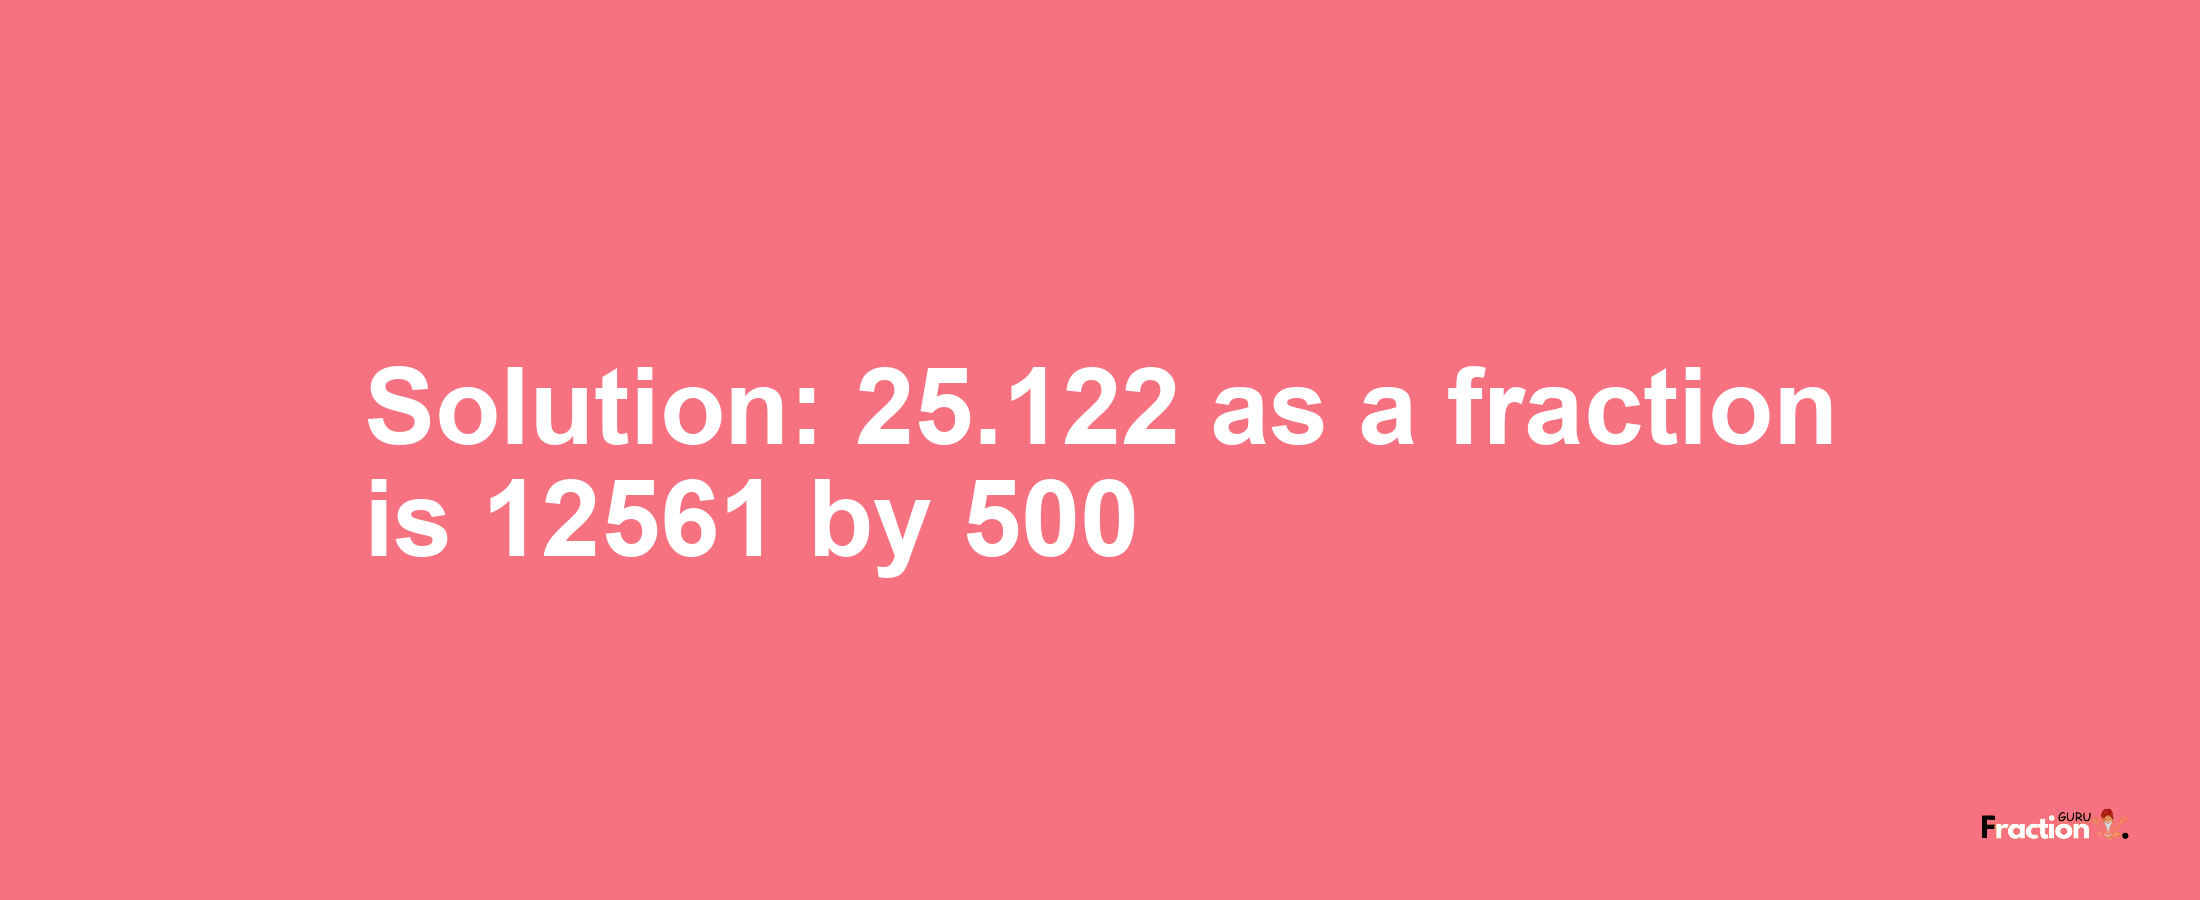 Solution:25.122 as a fraction is 12561/500